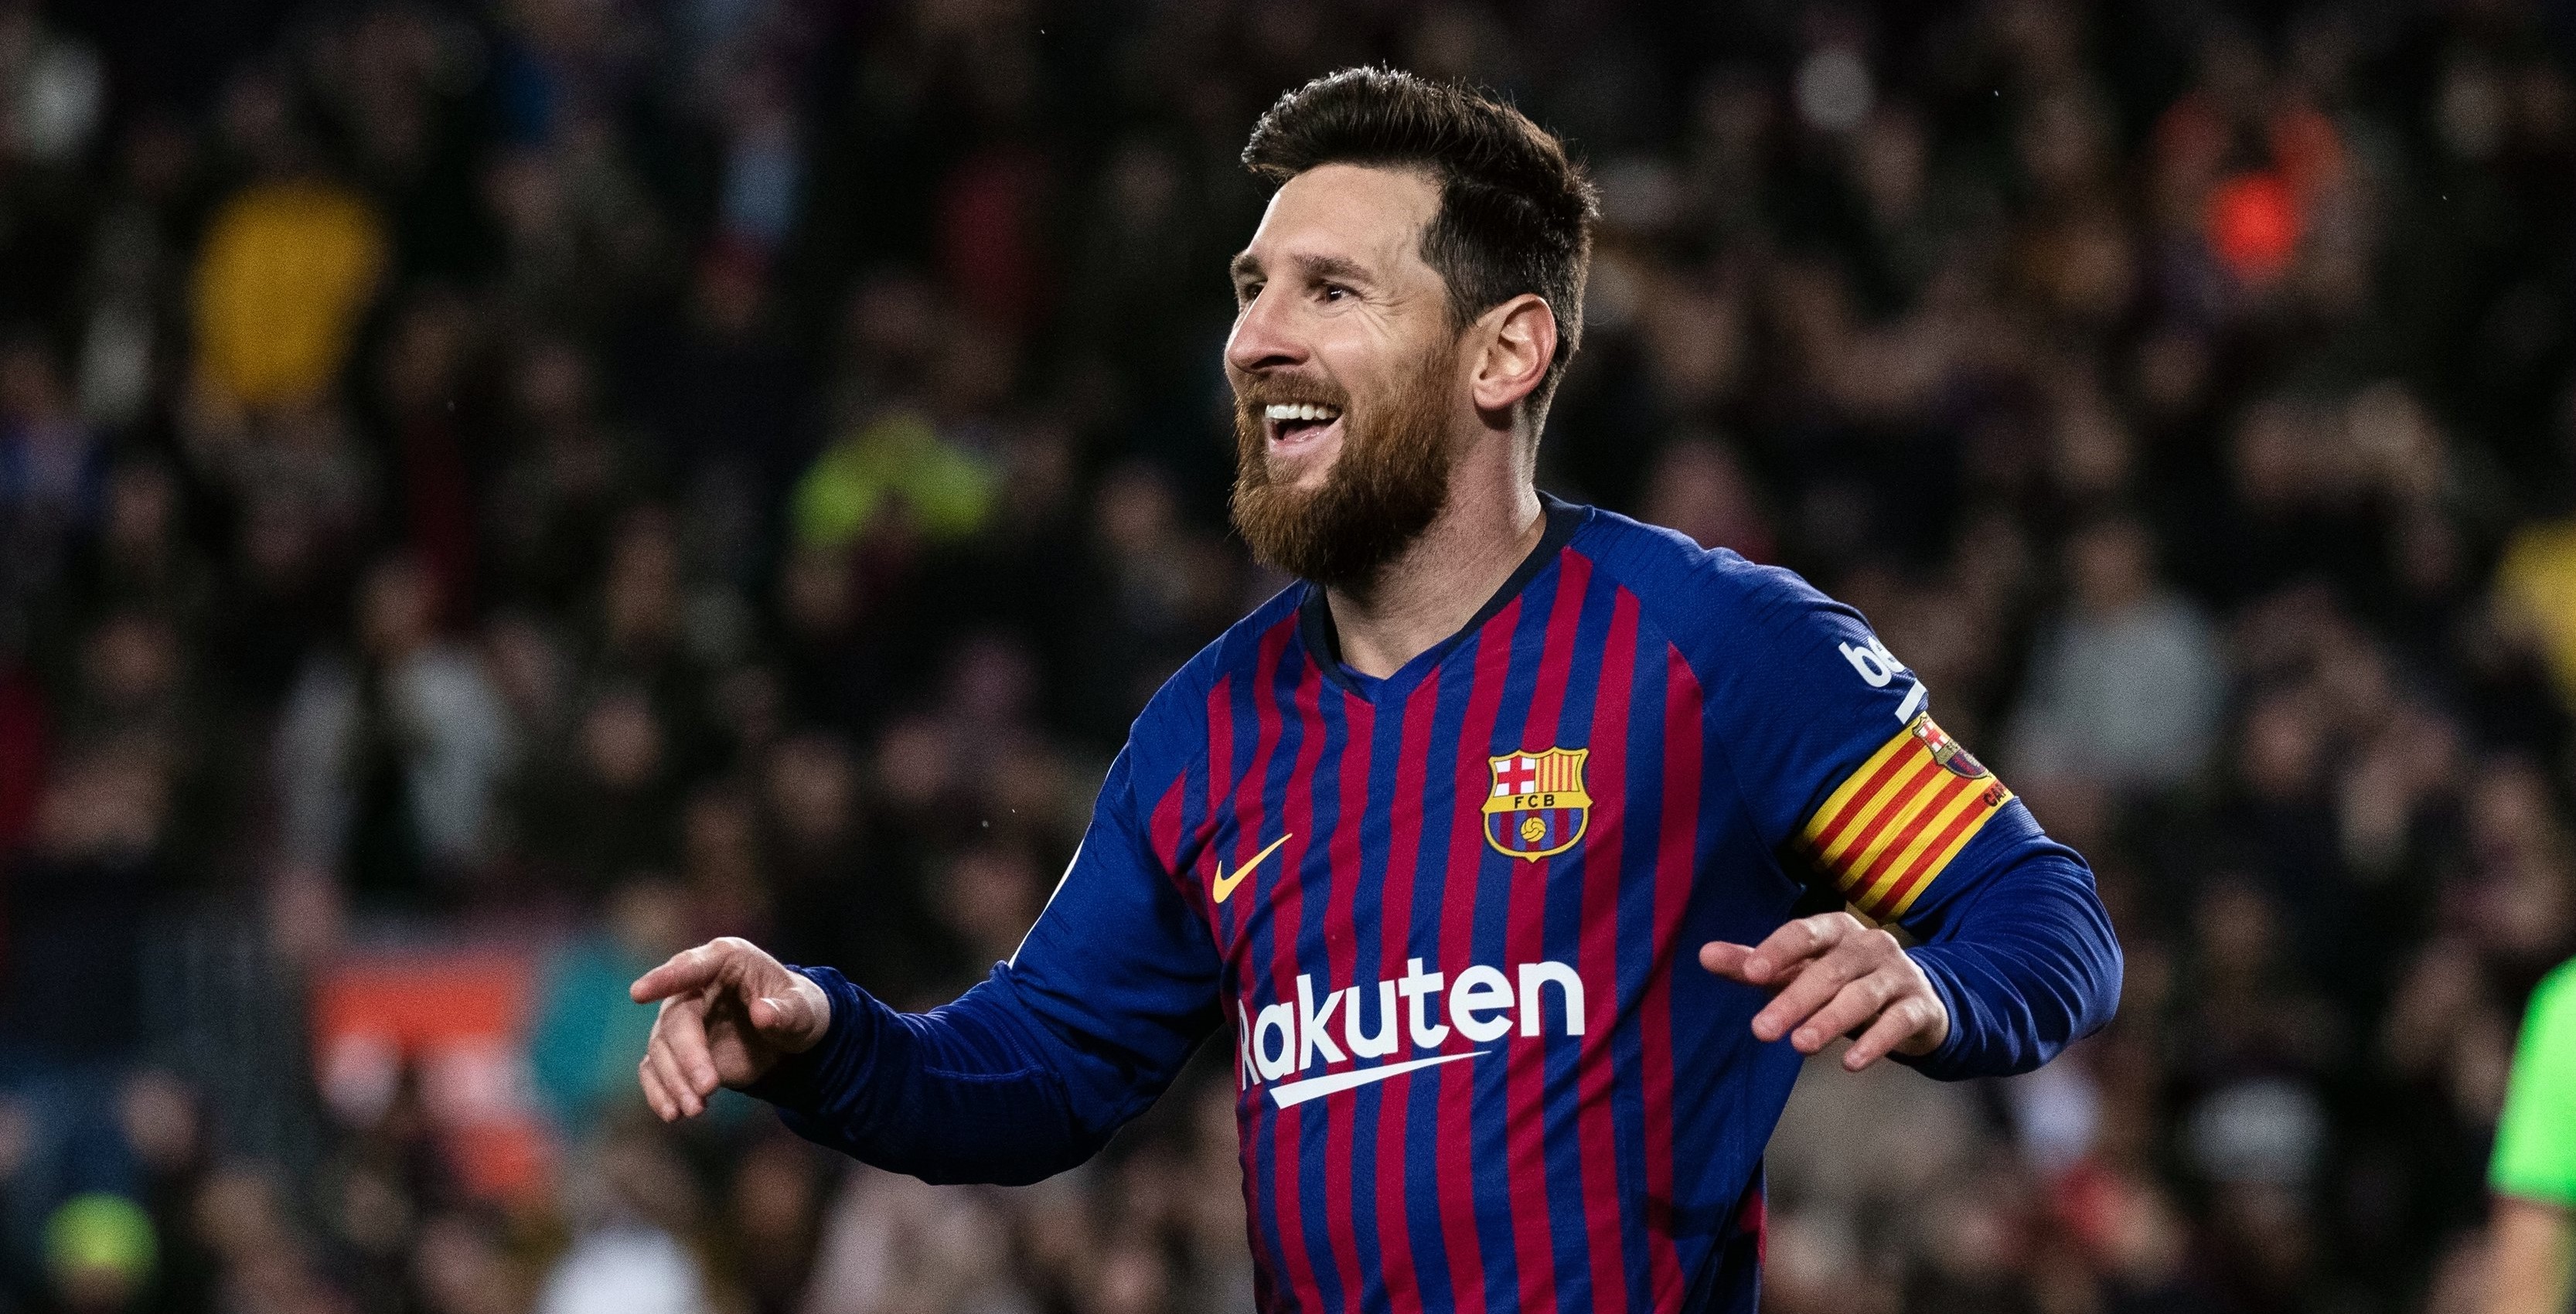 Messi's brace cruise Barcelona to quarter-finals of Champions League